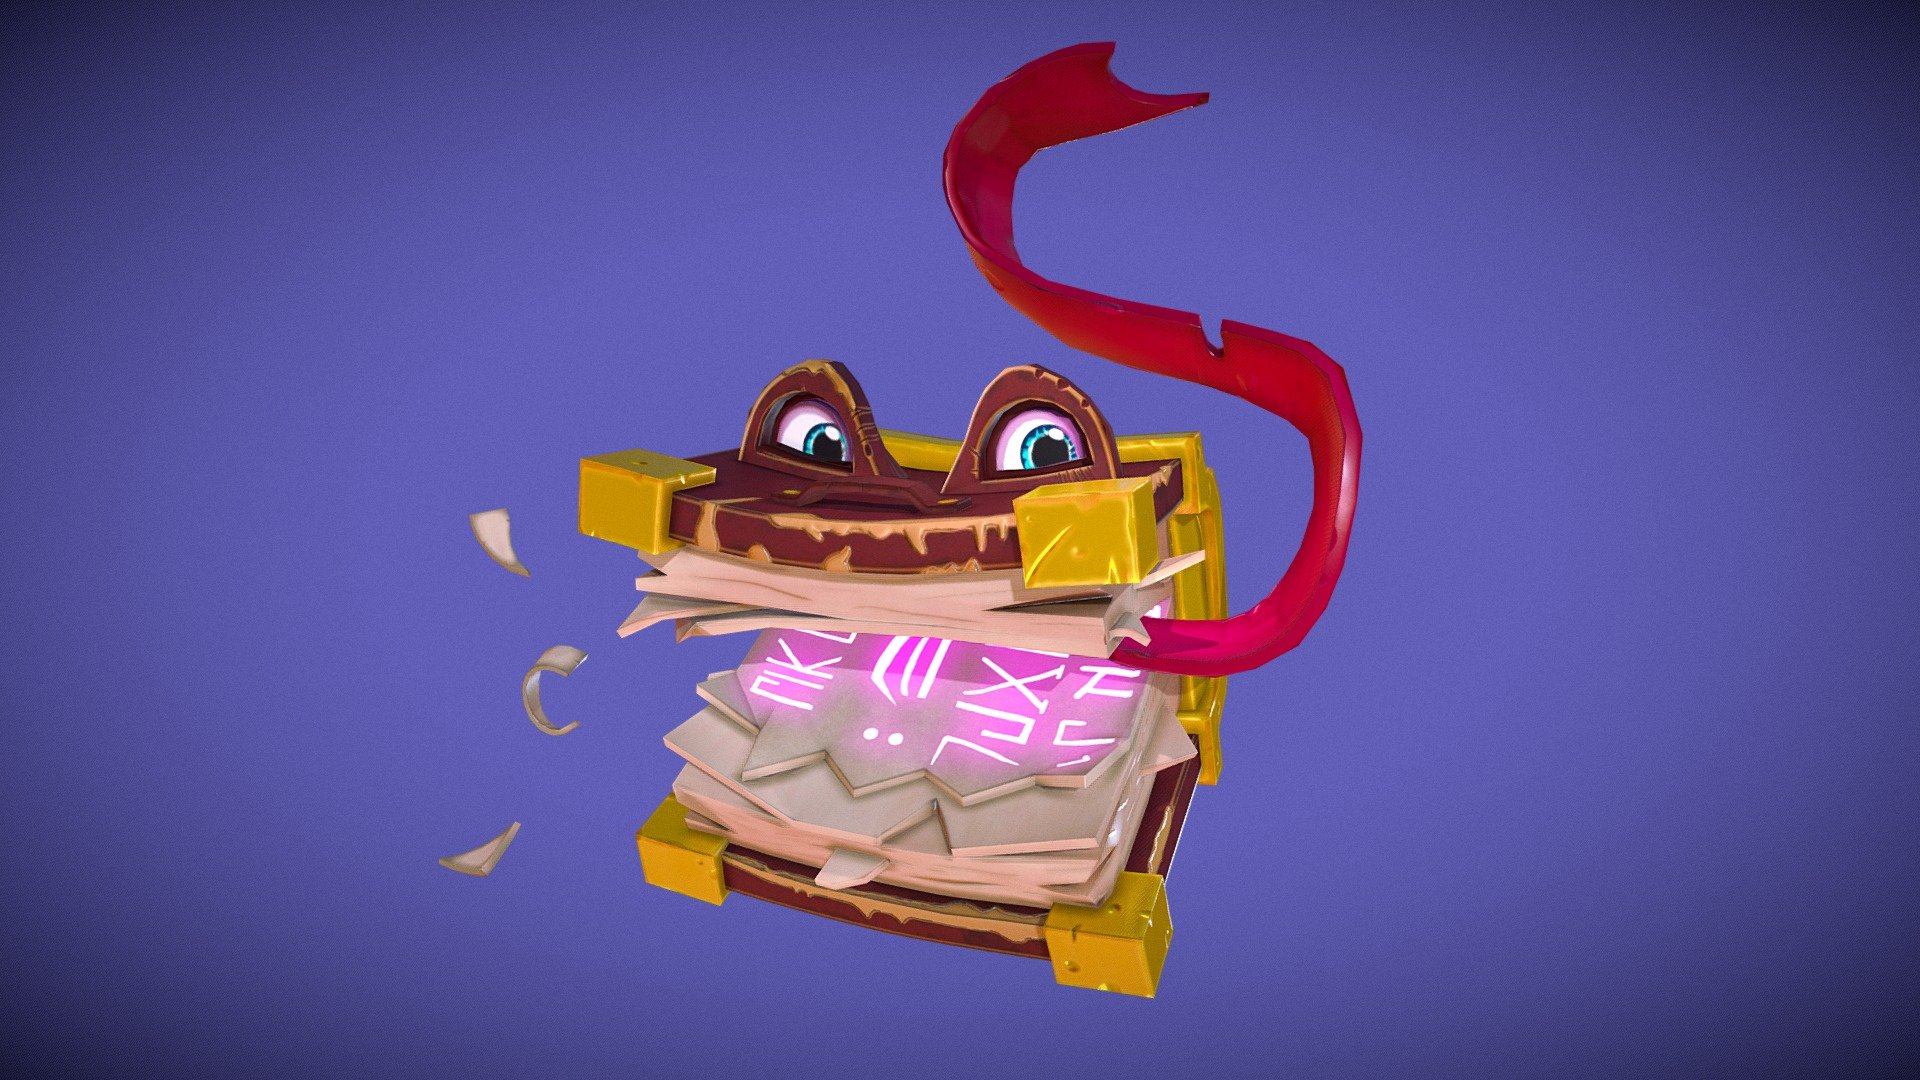 You want to cast a spell? I want to cast a spell!

Babbling Book that I made for the fifth week of #SketchfabWeeklyChallenge.

Remembered the times playing Hearthstone when I was in Highschool, some good times.

Based on an artwork made by AJ Nazzaro.

Made with Maya, Zbrush and Substance Painter 3d model